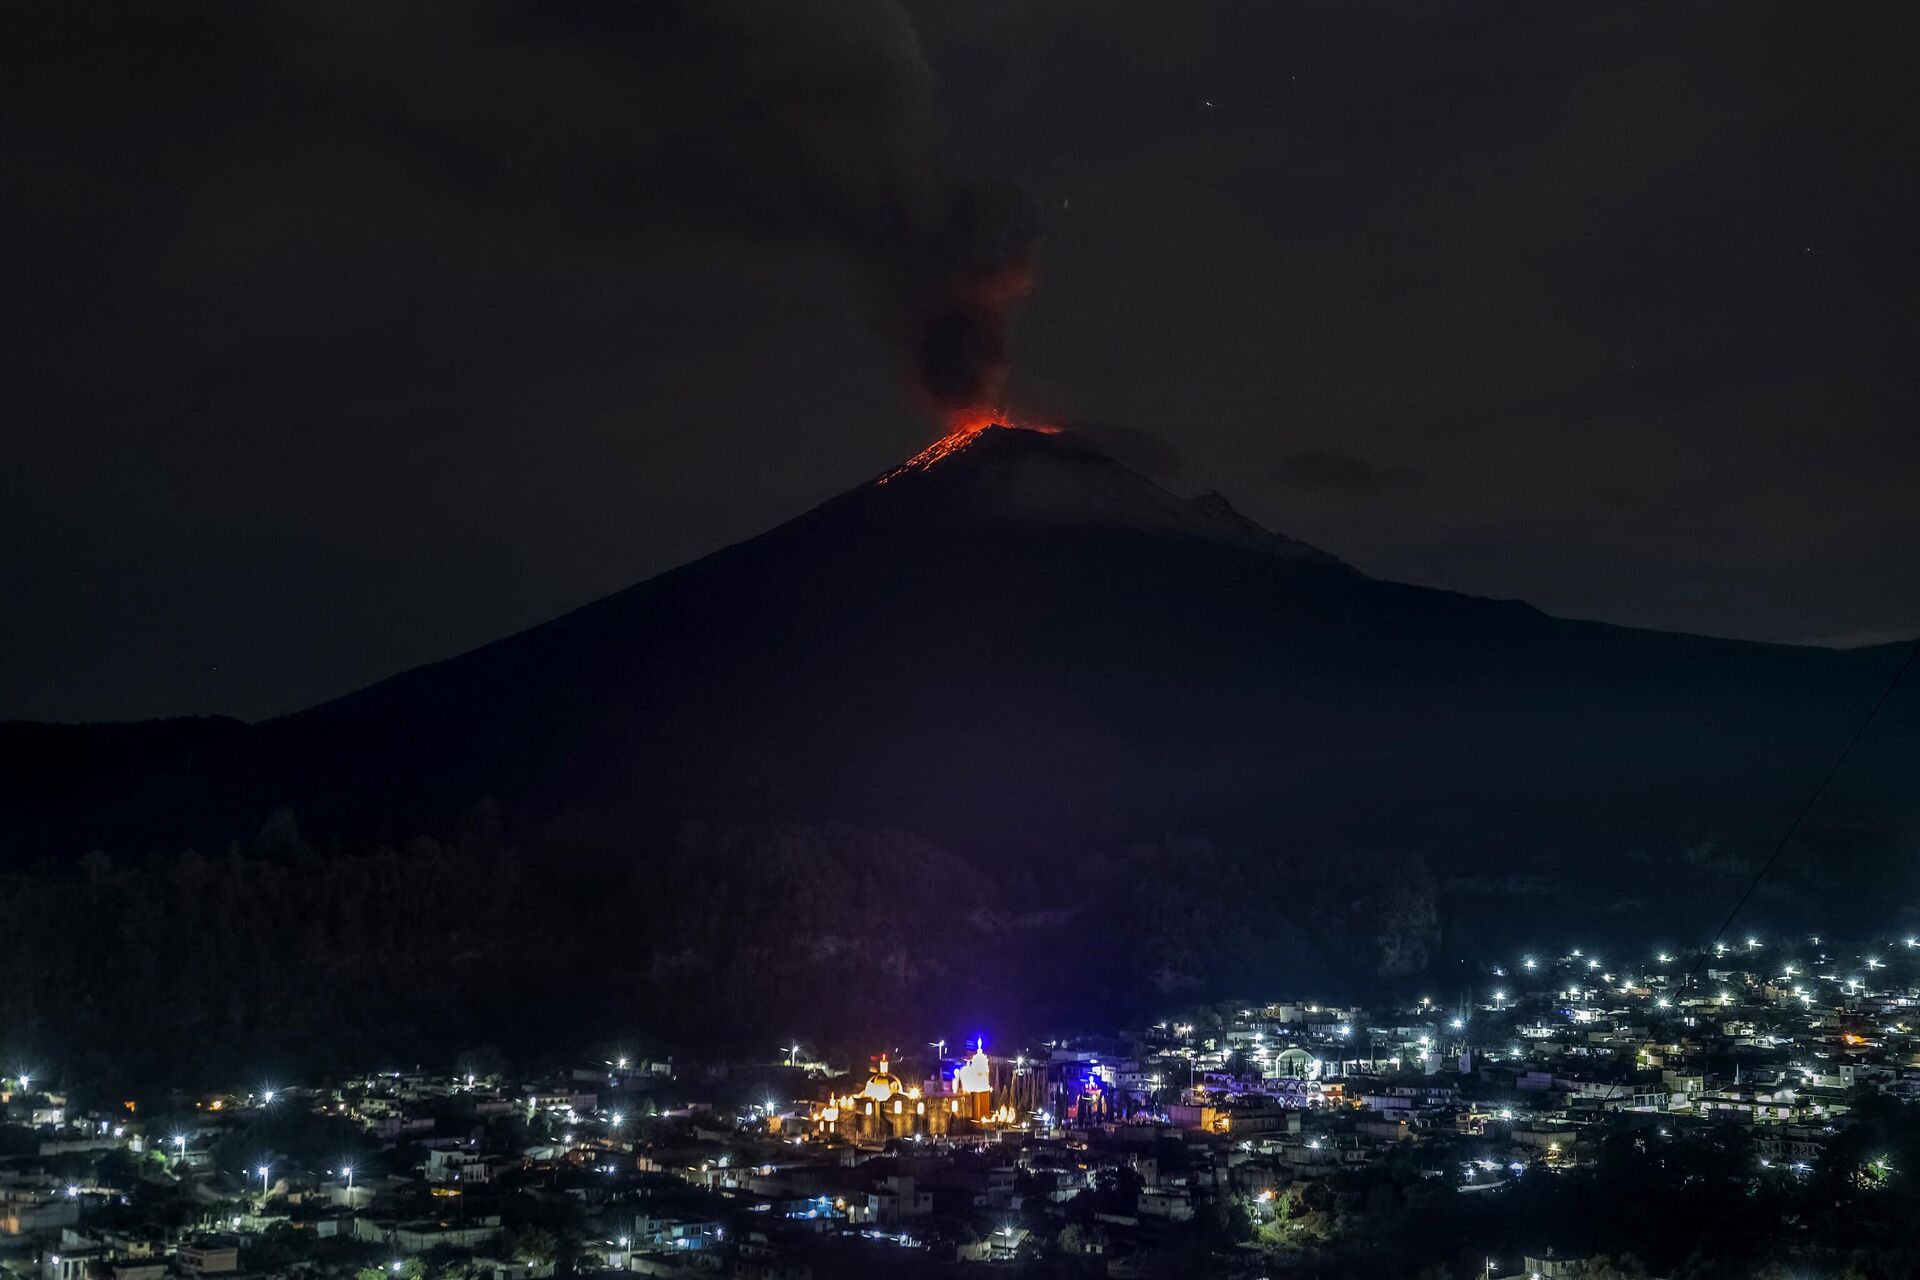 The Popocatepetl Volcano spews ash and smoke as seen from thr Santiago Xalitzintla community, state of Puebla, Mexico, on May 22, 2023. Mexican authorities on May 21 raised the warning level for the Popocatepetl volcano to one step below red alert, as smoke, ash and molten rock spewed into the sky posing risks to aviation and far-flung communities below. Sunday's increased alert level -- to yellow phase three -- comes a day after two Mexico City airports temporarily halted operations due to falling ash. - Sputnik International, 1920, 23.05.2023